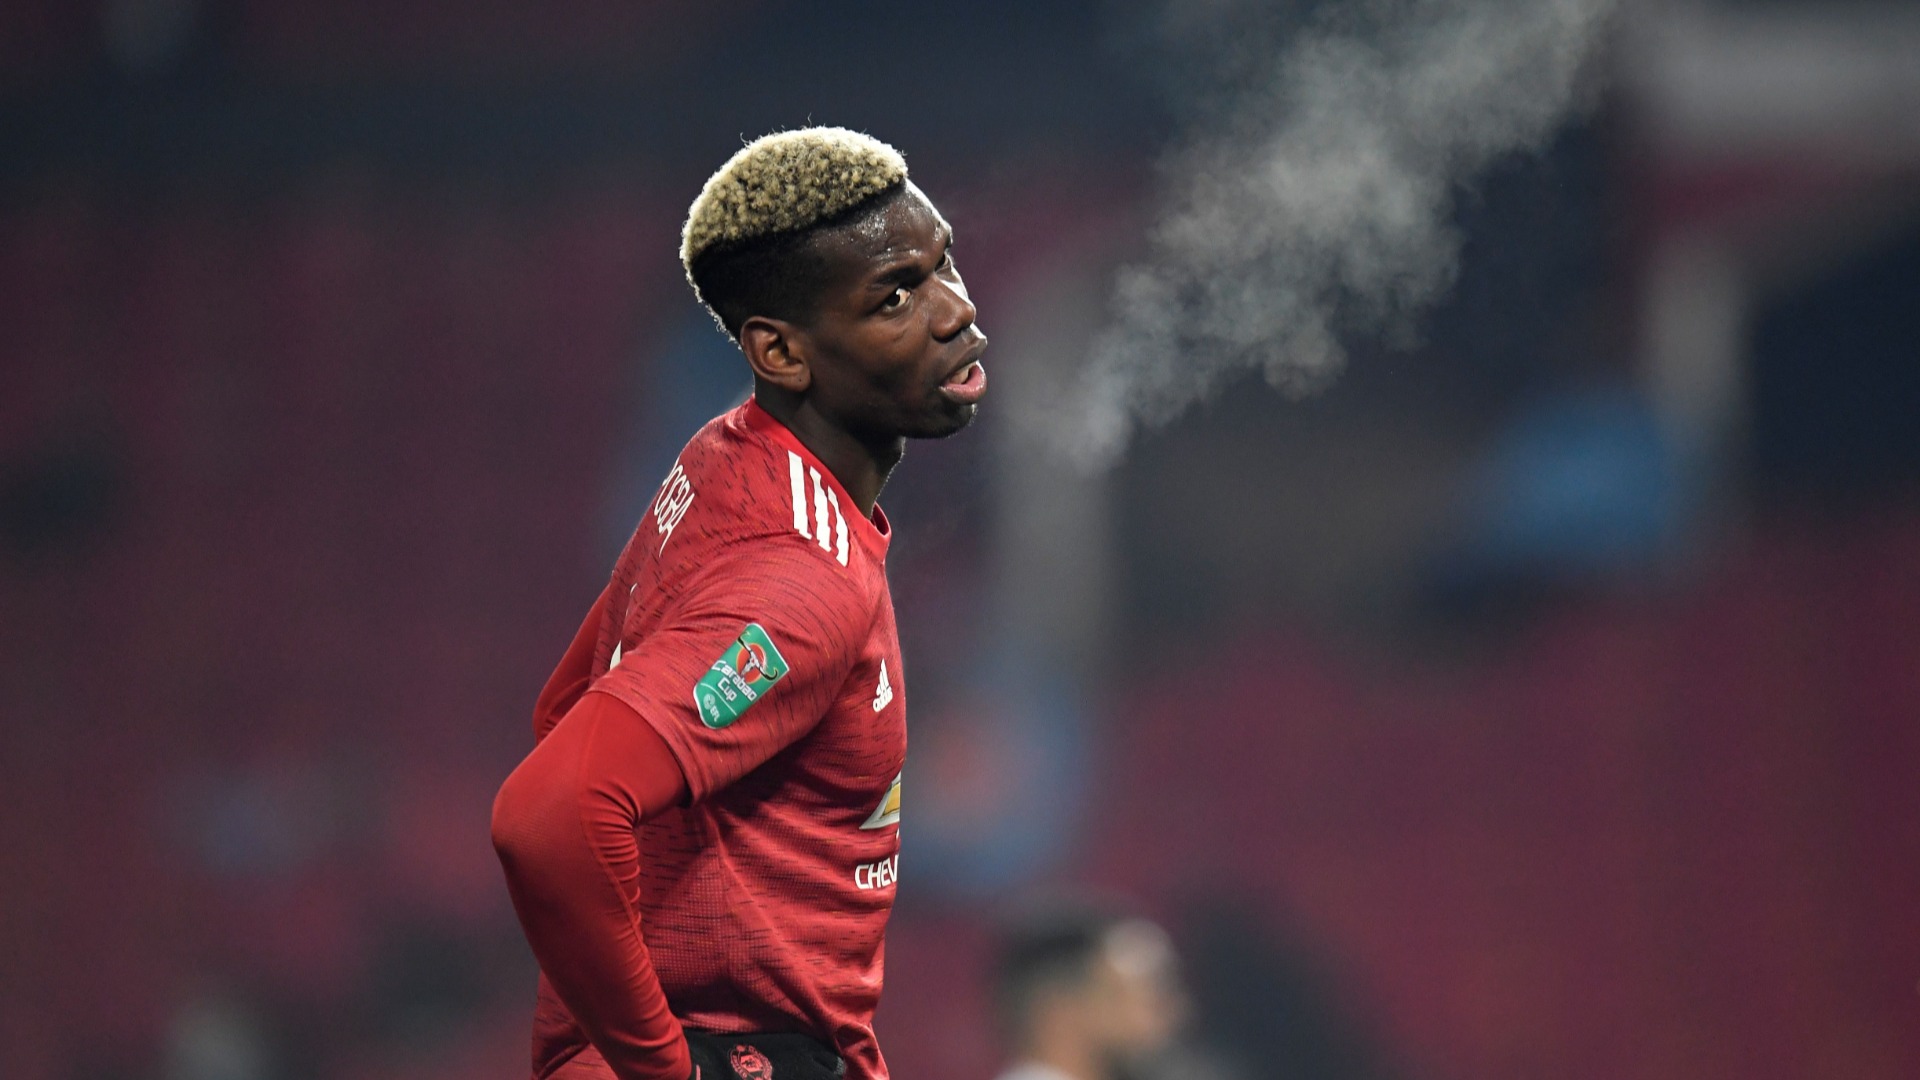 Louis Saha feels Manchester United can expect even better play from Paul Pogba, whose revival is benefiting Bruno Fernandes.